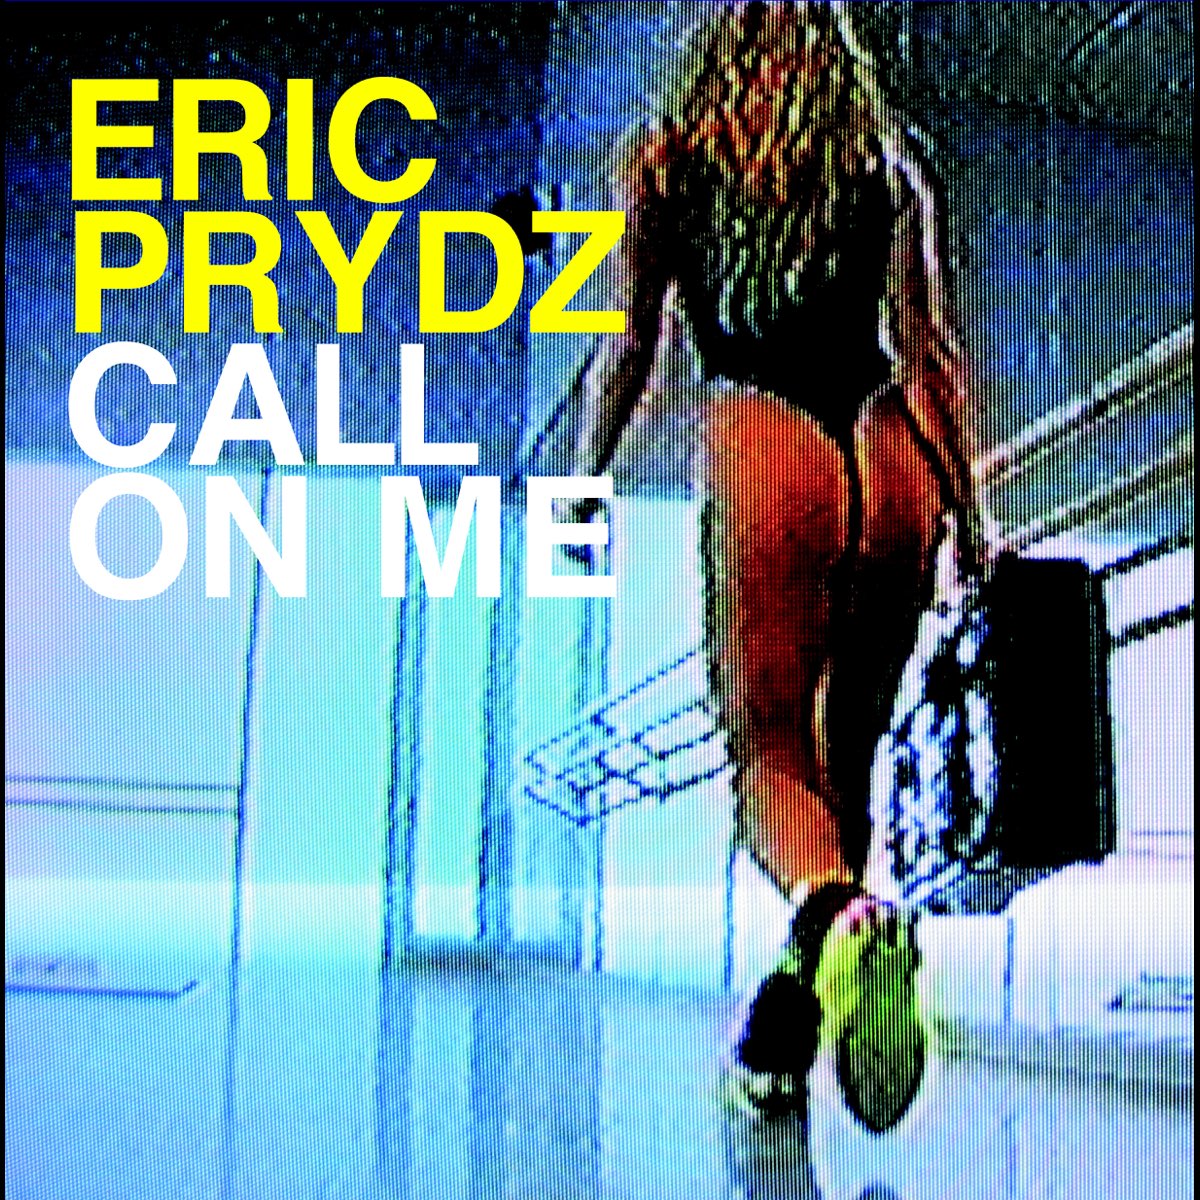 Call on Me - EP by Eric Prydz.